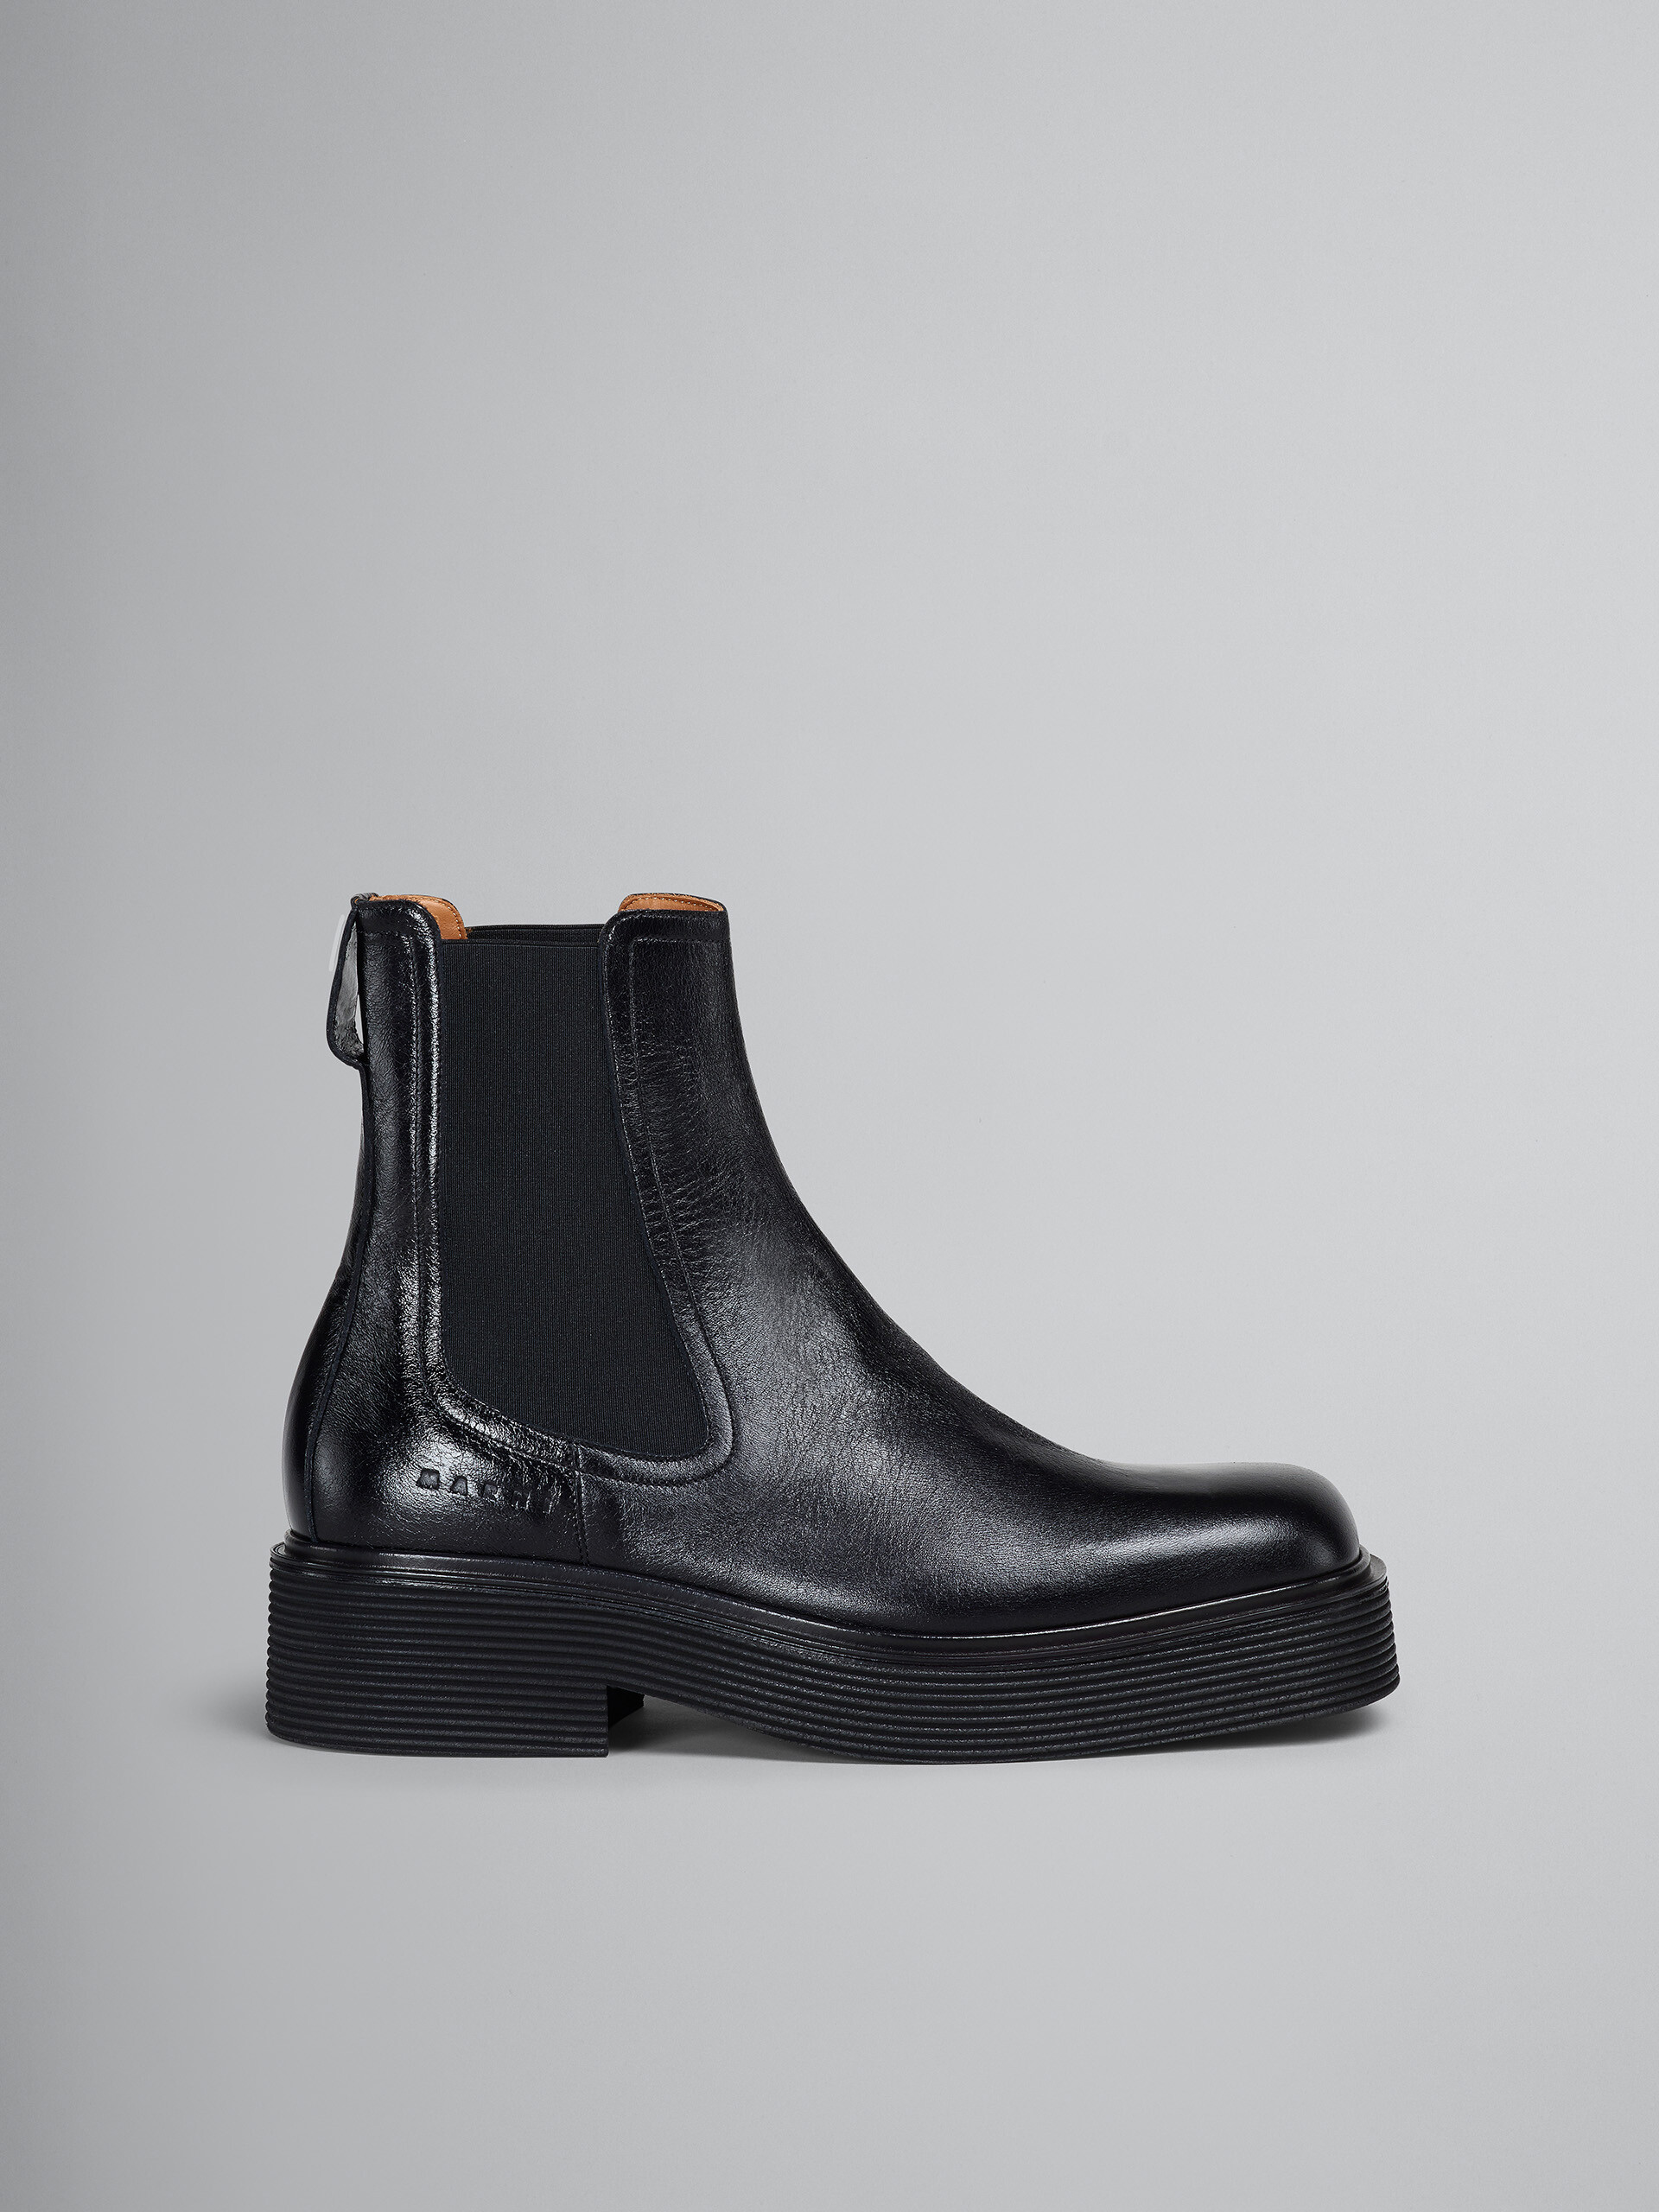 Shiny leather Chelsea boot - Boots - Image 1